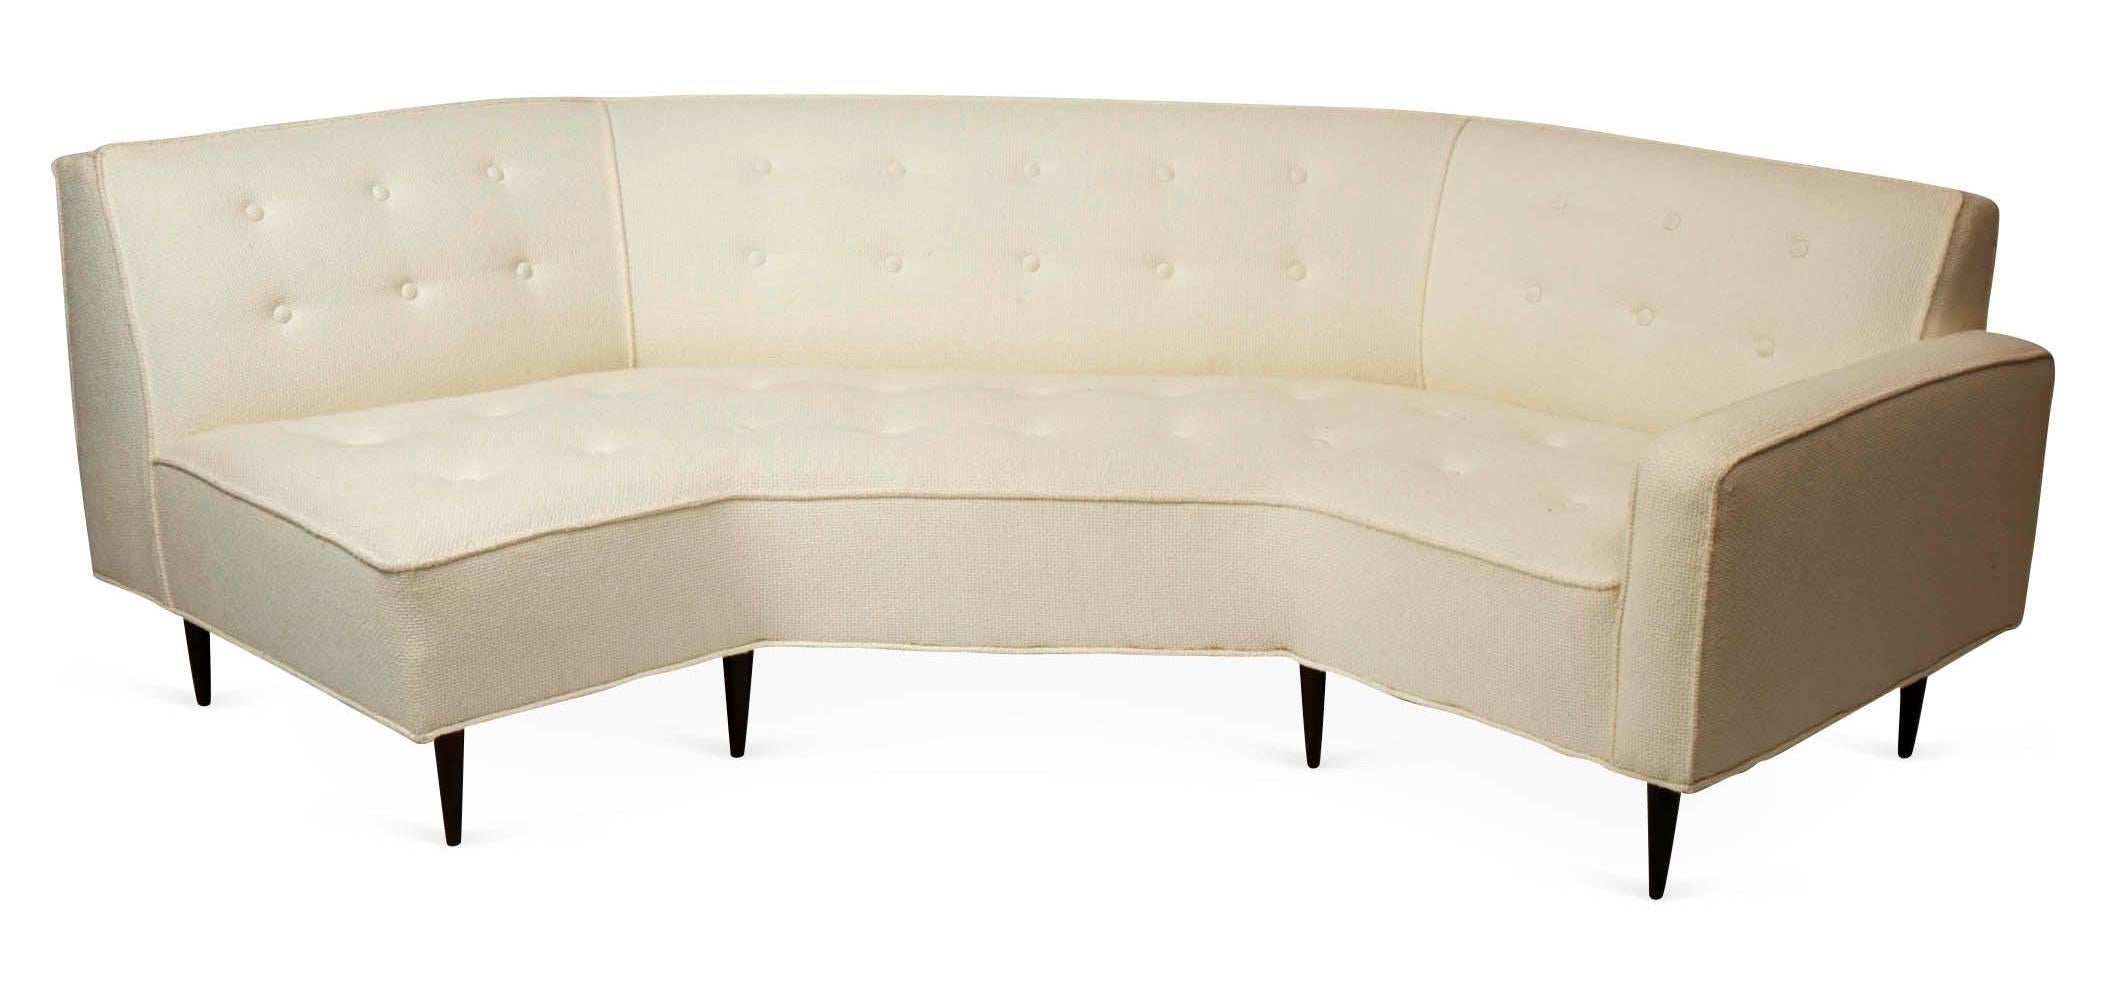 Elegant and modern, button tufted, sectional sofa attributed to Harvey Probber. Sectional seating pieces can stand alone, or be combined for large flexible seating arrangements (forming a configuration similar to letter 